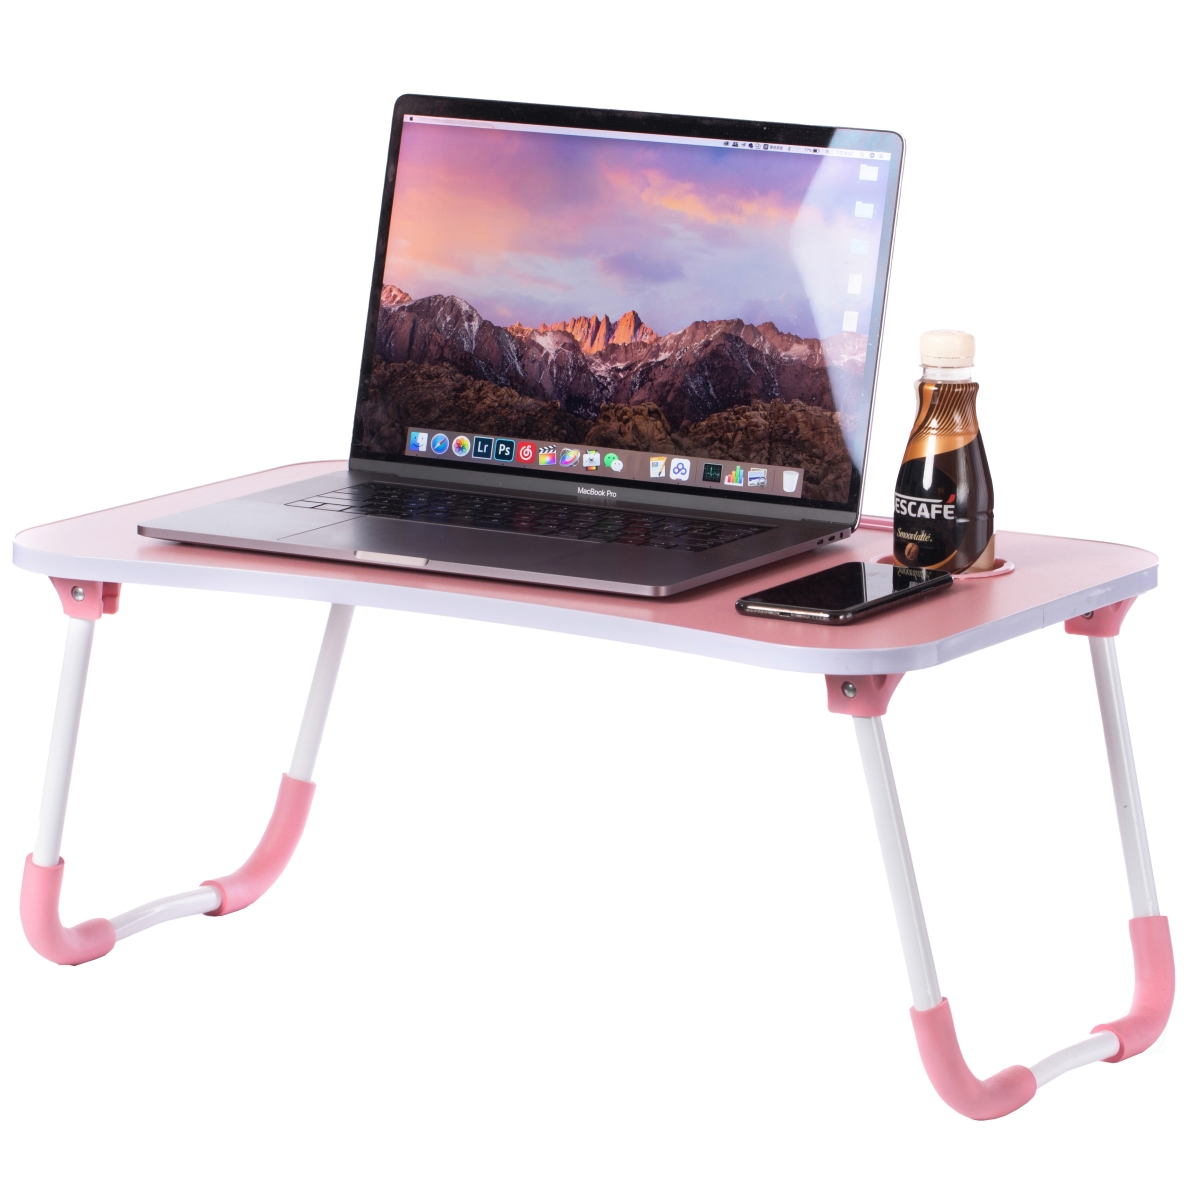 Basicwise QI003987.PK 10.75 x 15.5 x 23.5 in. Bed Tray Laptop Foldable Kids Lap Desk Homework Table, Pink